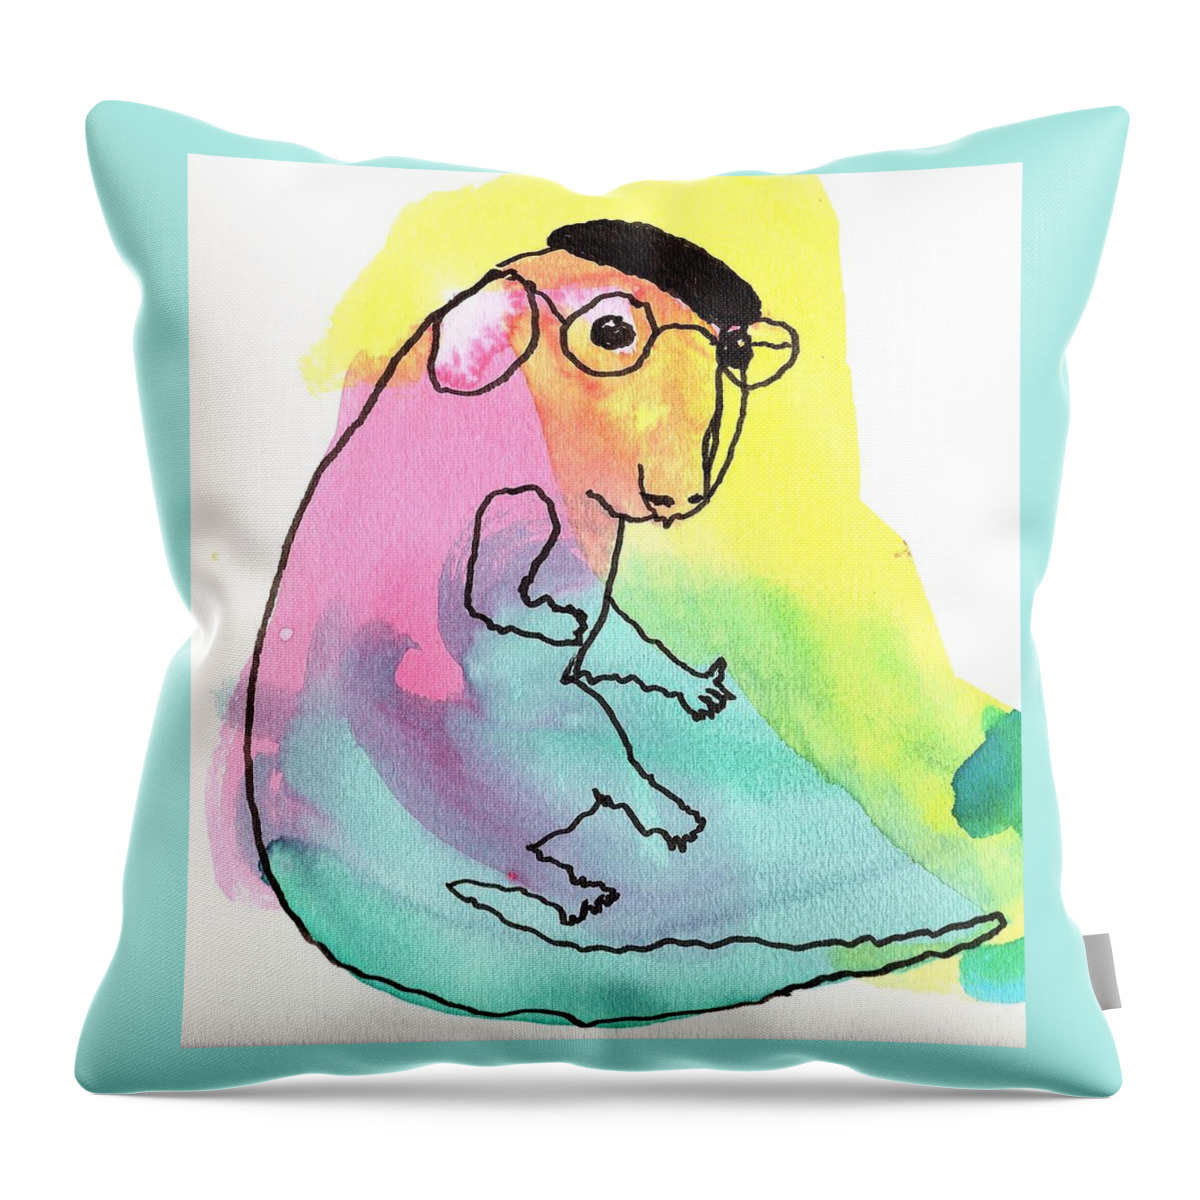 Parisian Throw Pillow featuring the painting Parisian Rat by Dawn Boswell Burke